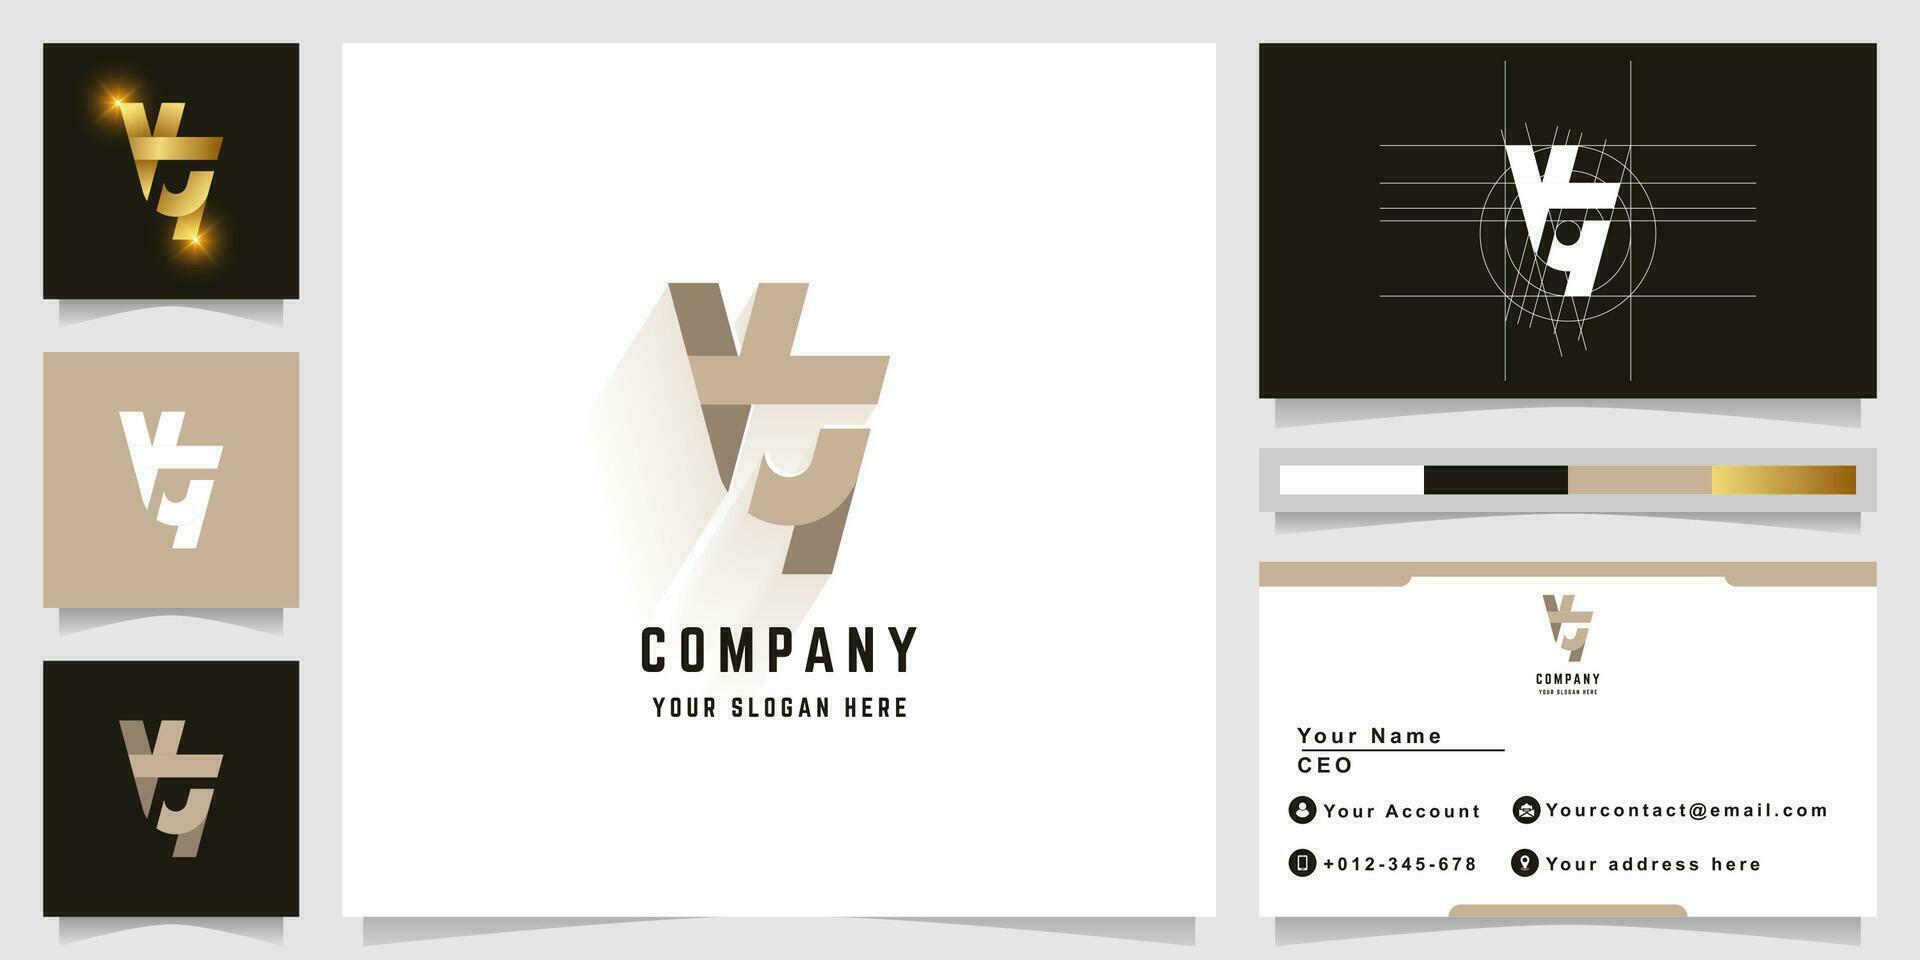 Letter KY or YY monogram logo with business card design vector